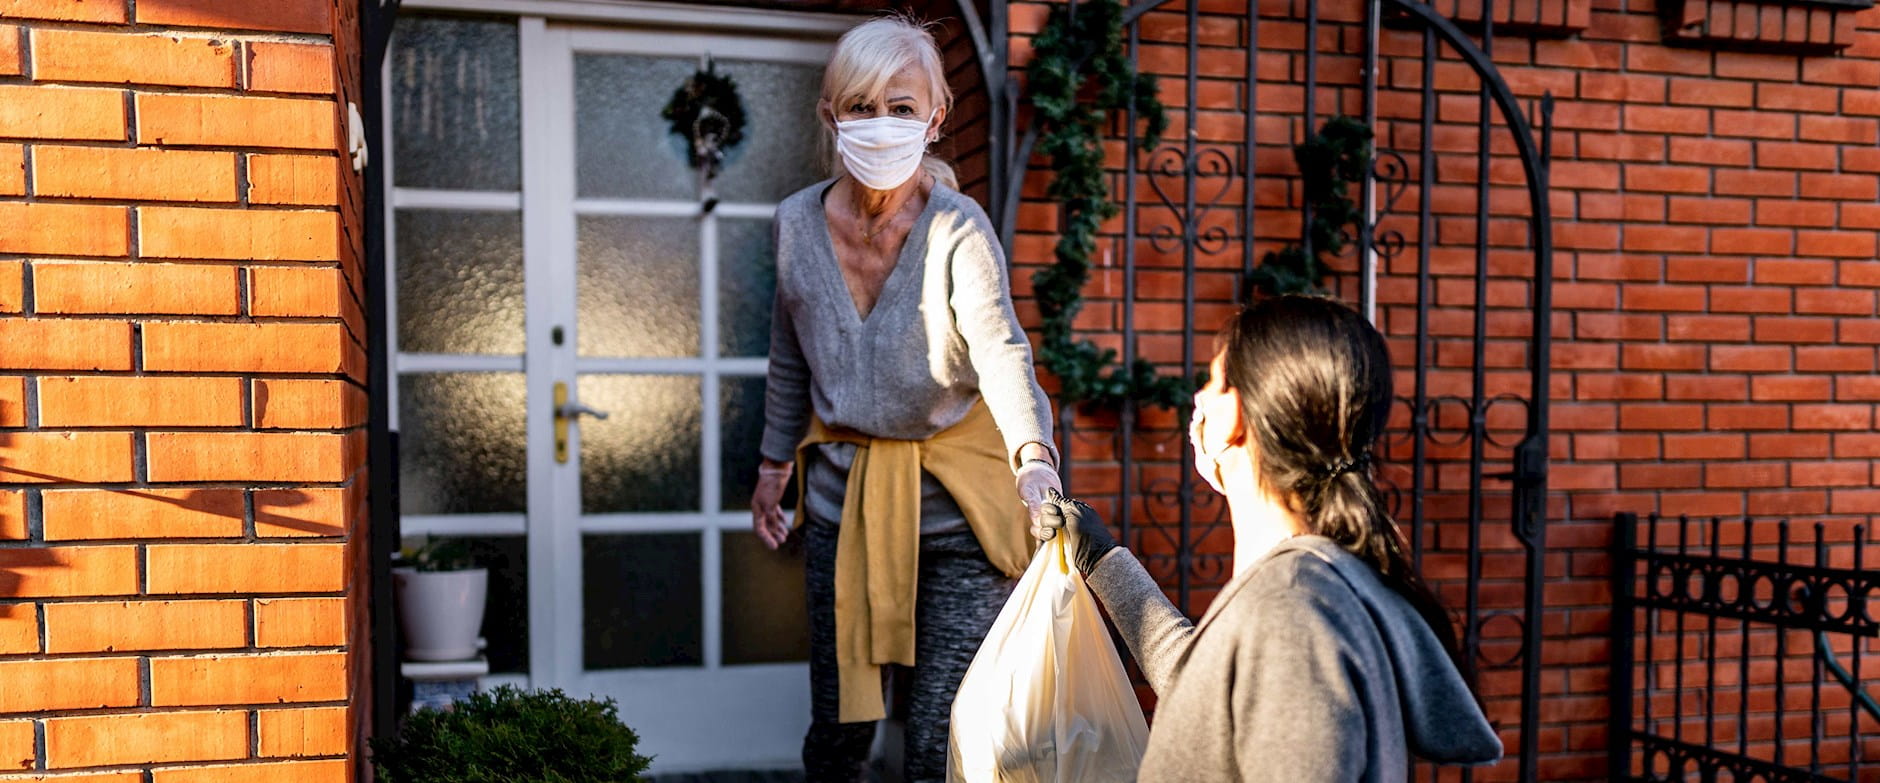 A masked volunteer hands groceries off to a masked silver-haired woman